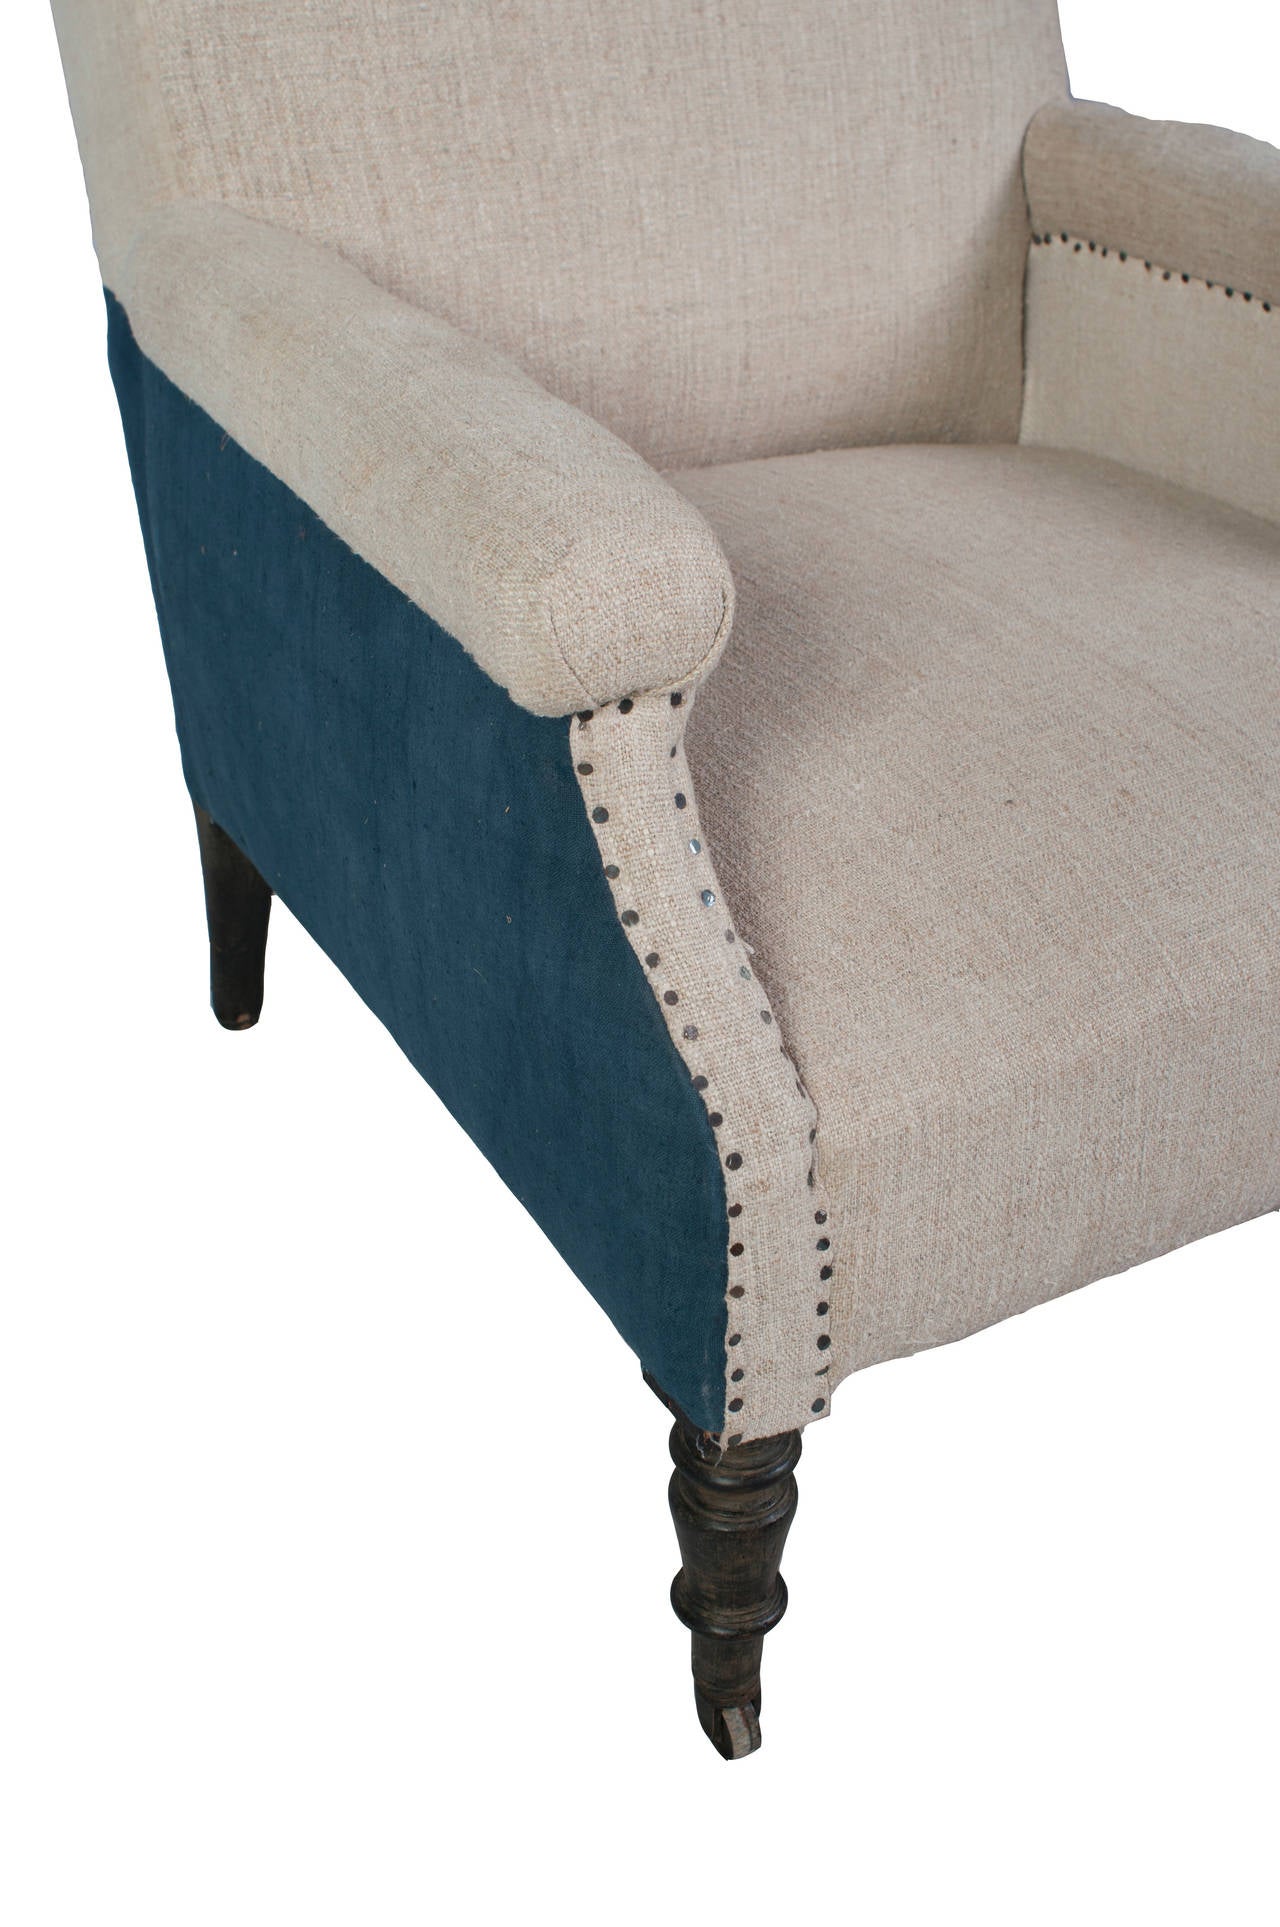 A single Napoleon III fauteuil, new upholstery and casters.